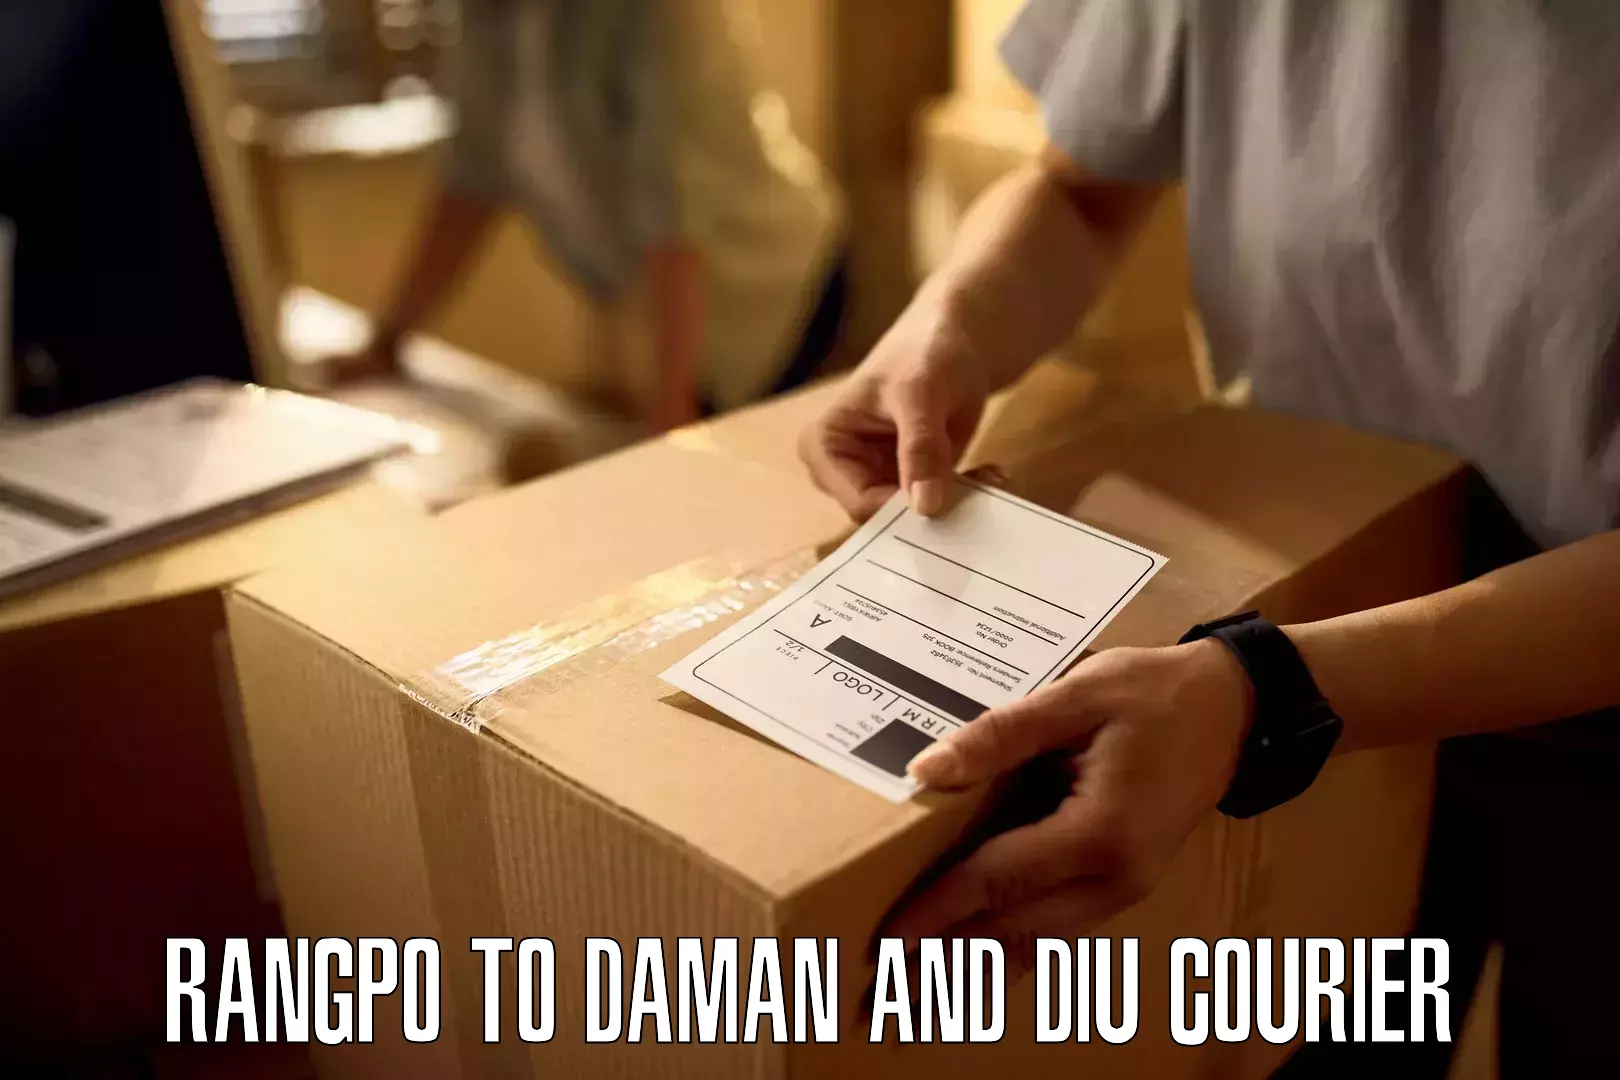 Nationwide delivery network Rangpo to Daman and Diu